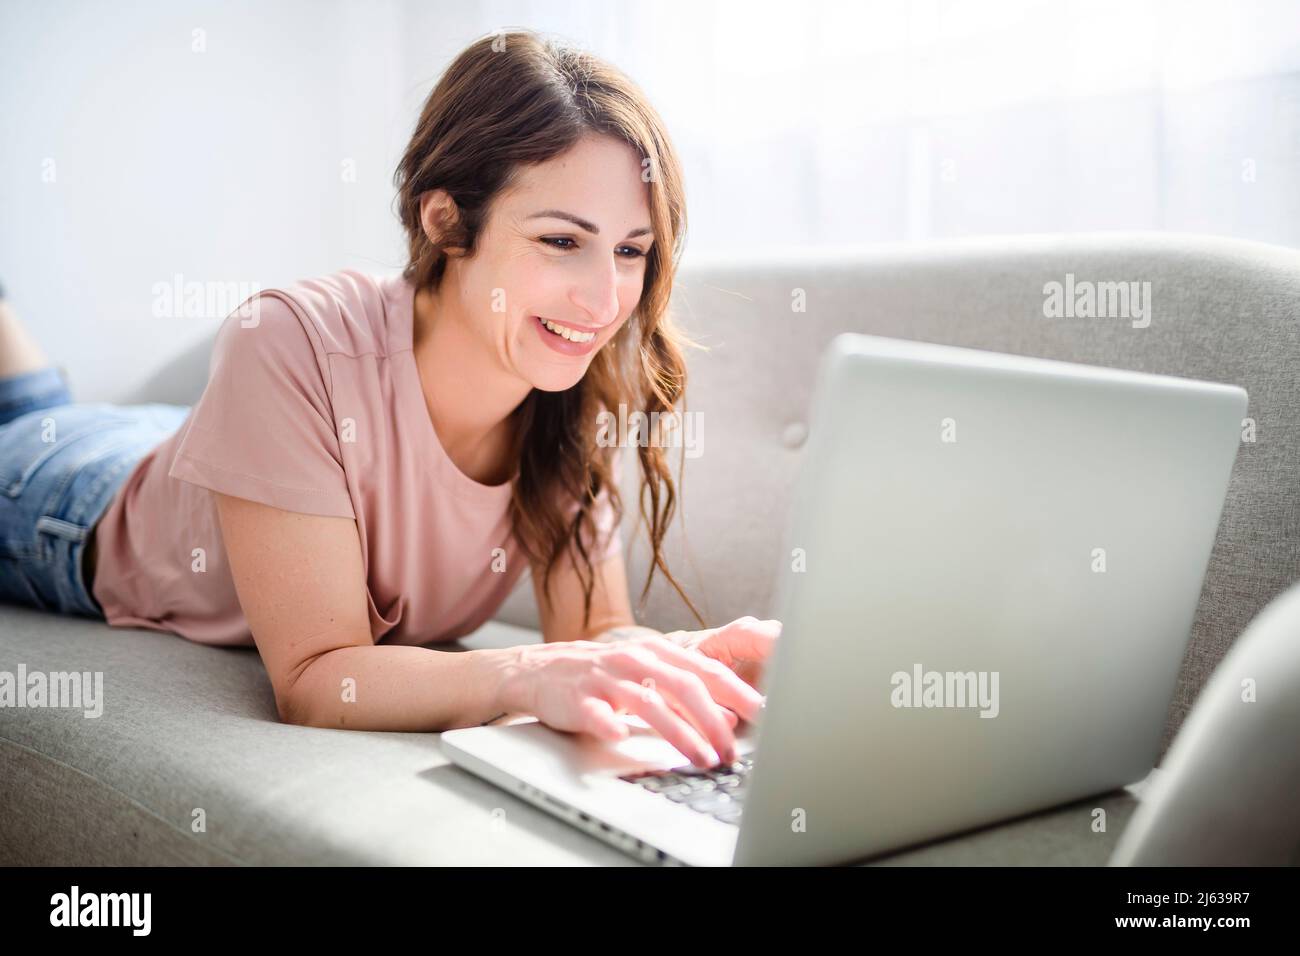 Woman relaxing at home on couch, enjoying free time with laptop on sofa Stock Photo